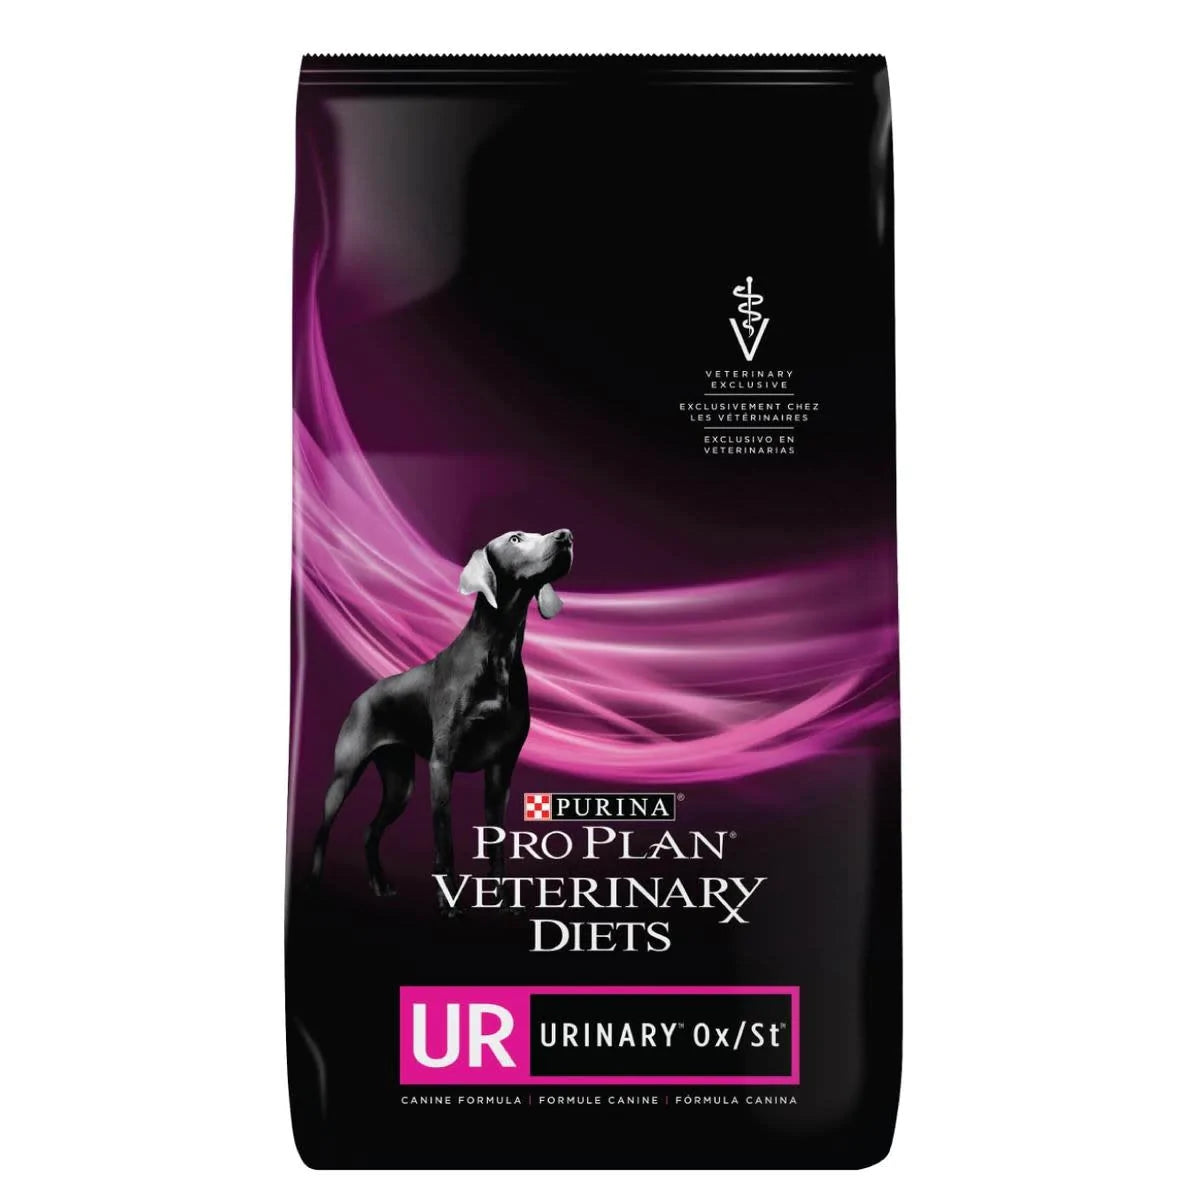 Purina Pro Plan Veterinary Diets Canine UR Urinary 2.72 Kg